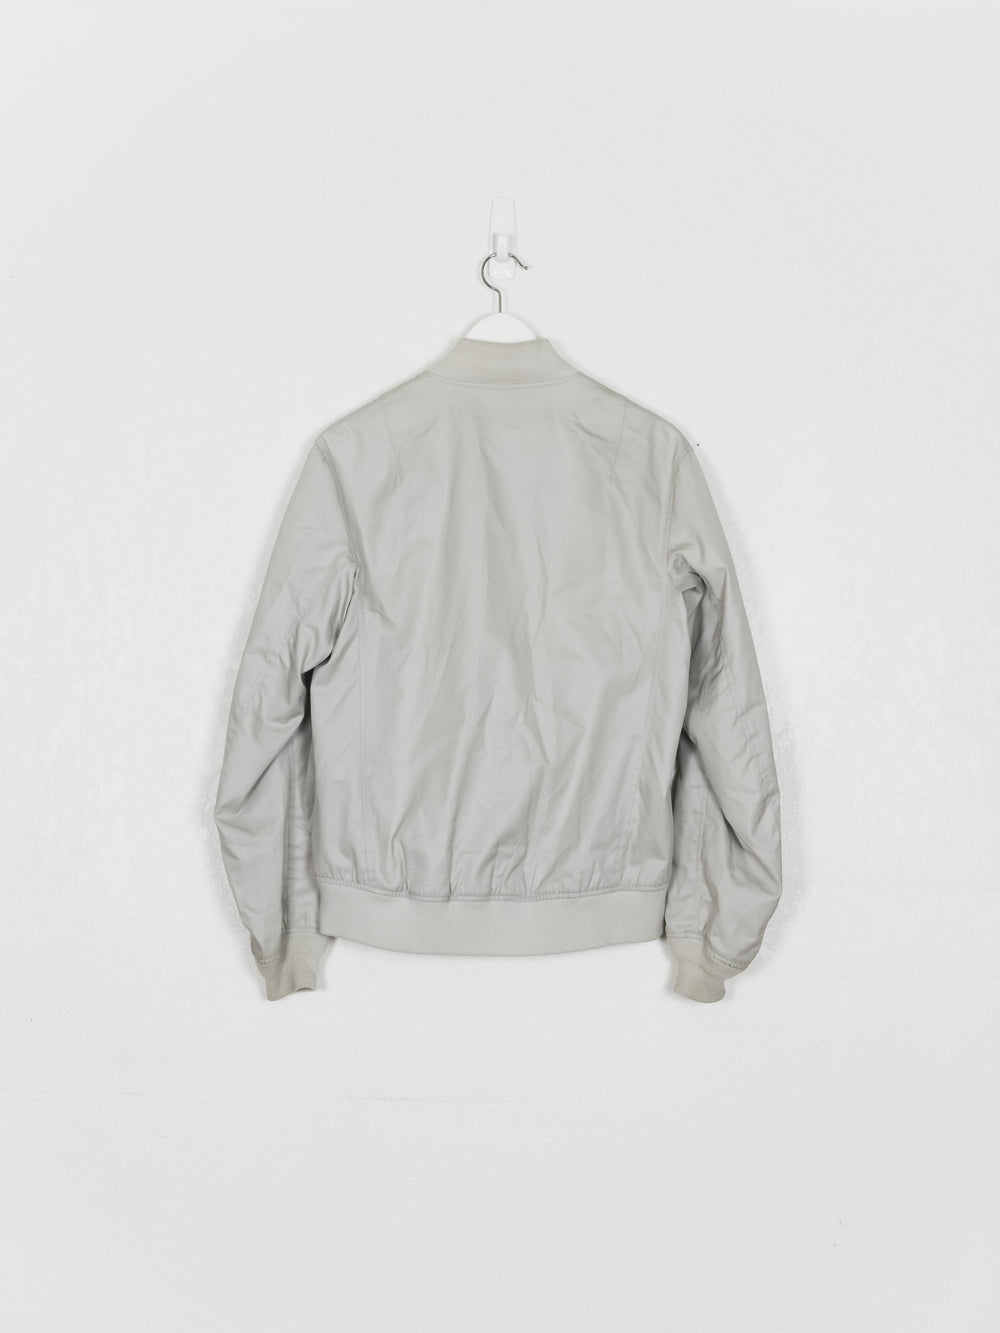 Lad Musician SS12 MA-1 Bomber